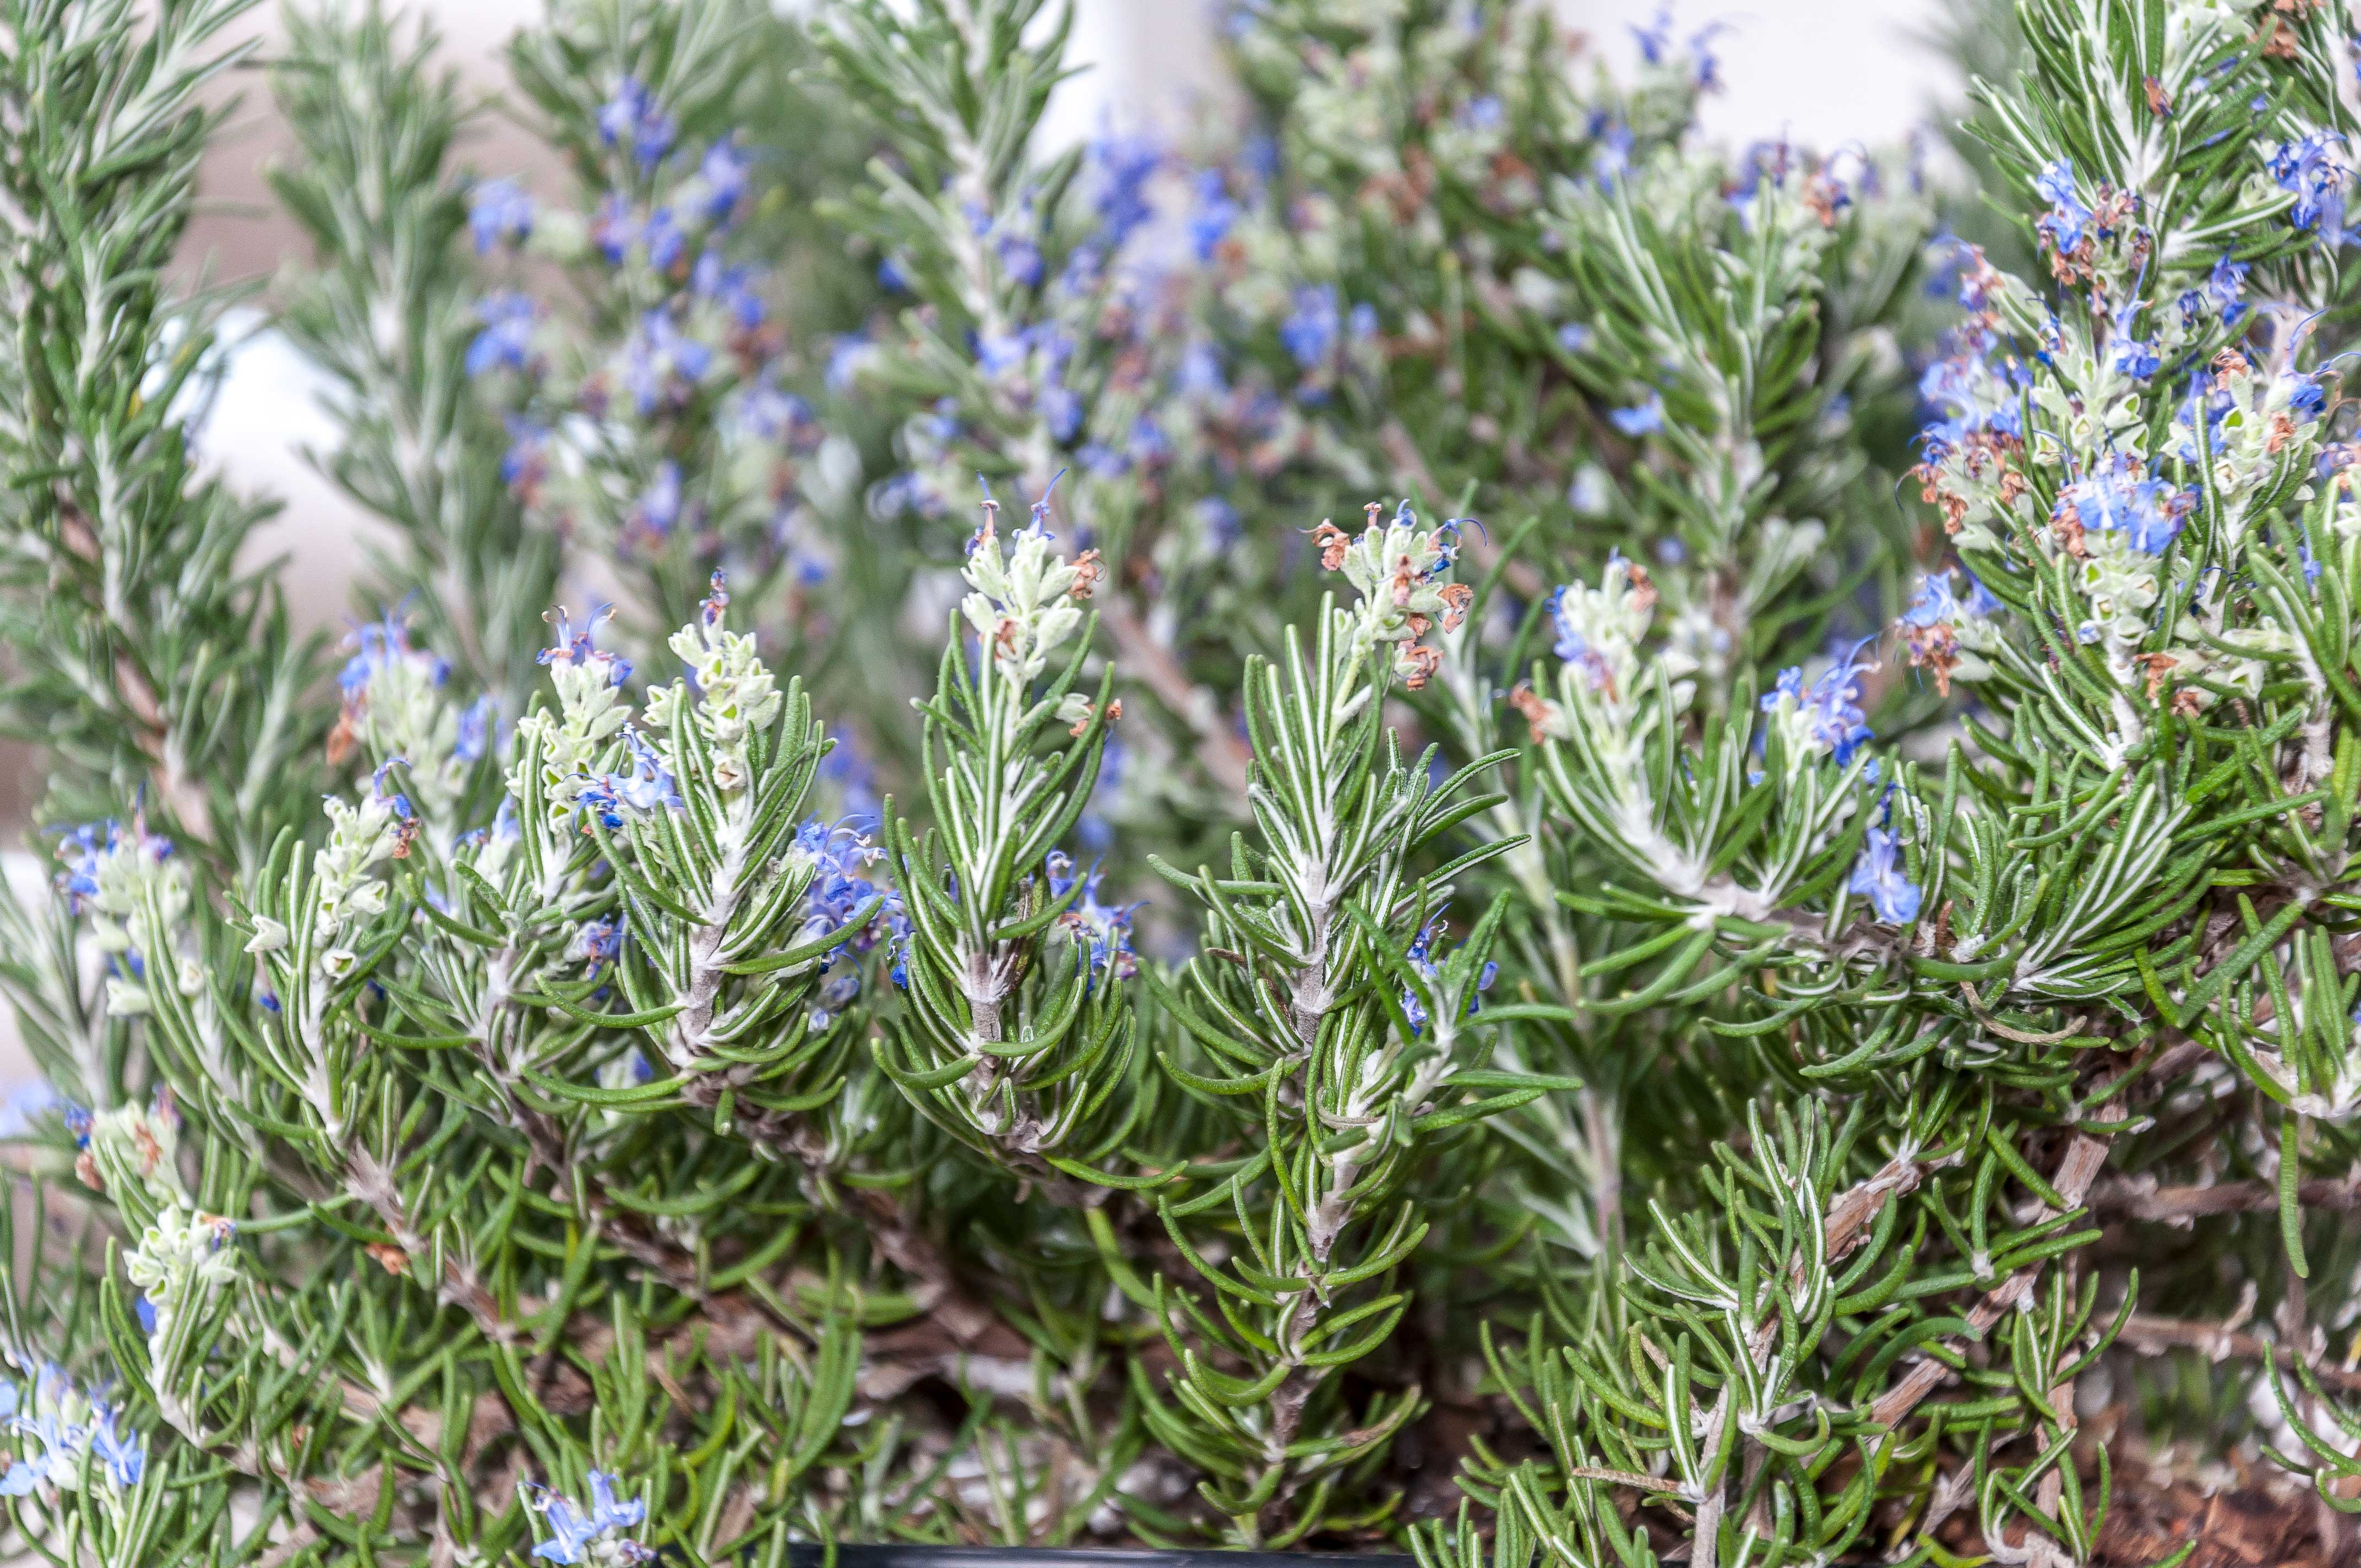 Rosemary: The Herb of Remembrance -